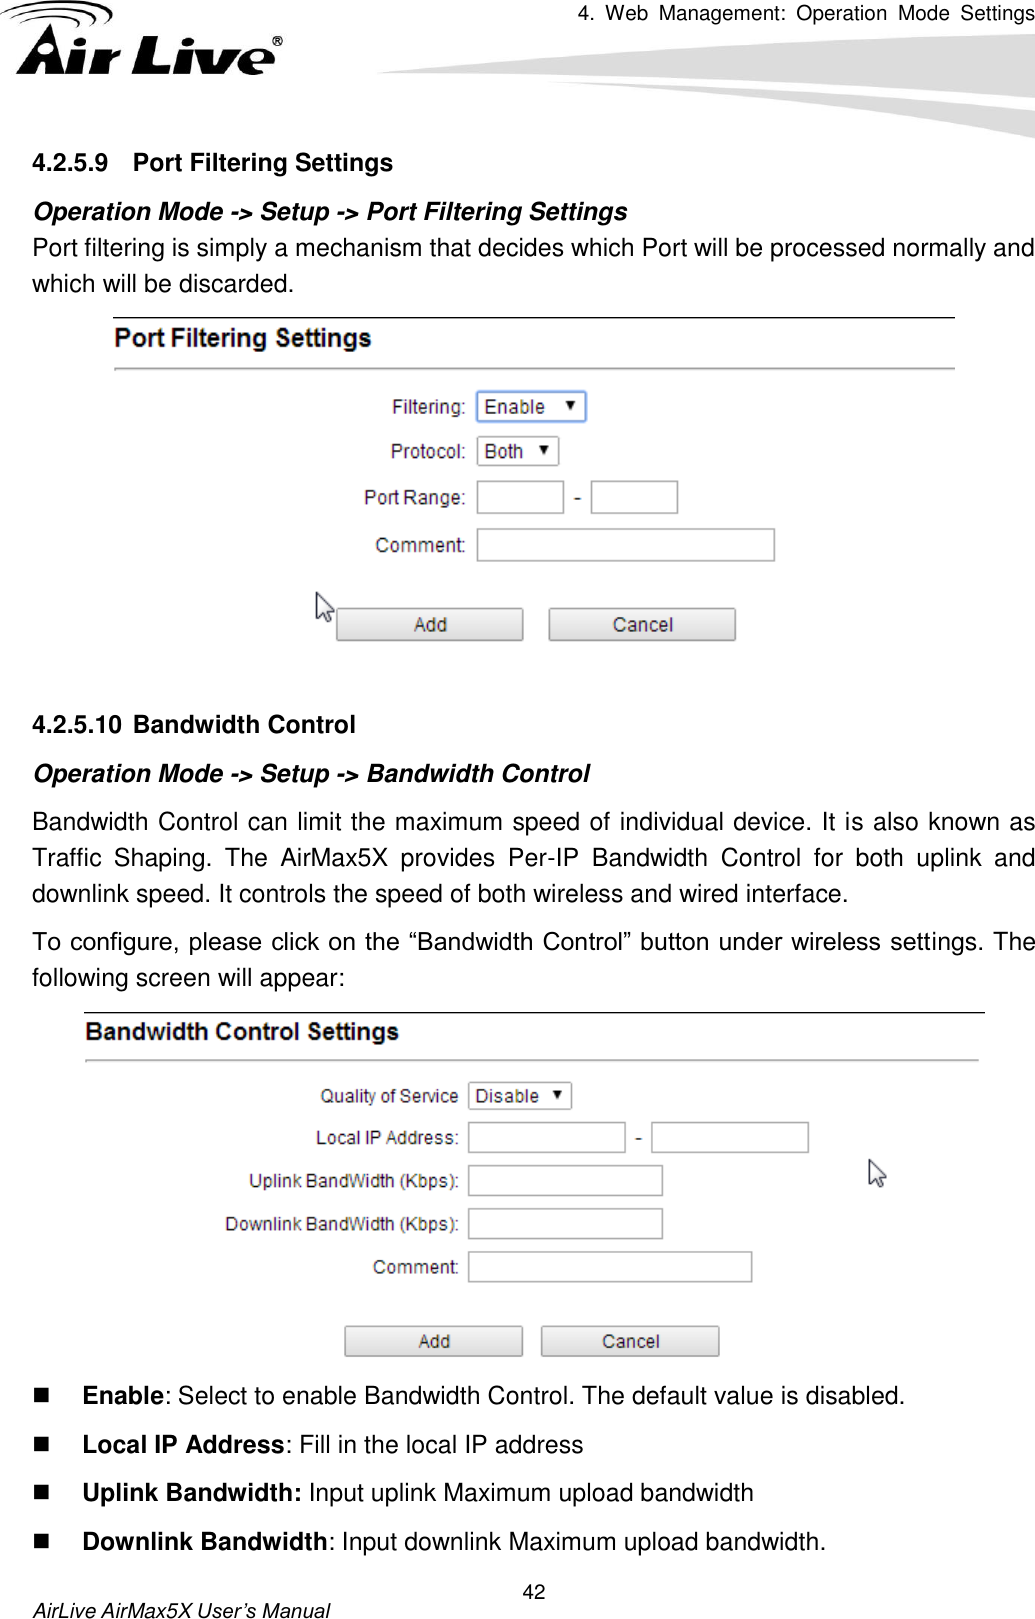 4.  Web  Management:  Operation  Mode  Settings   AirLive AirMax5X User’s Manual 42 4.2.5.9  Port Filtering Settings Operation Mode -&gt; Setup -&gt; Port Filtering Settings Port filtering is simply a mechanism that decides which Port will be processed normally and which will be discarded.     4.2.5.10 Bandwidth Control Operation Mode -&gt; Setup -&gt; Bandwidth Control Bandwidth Control can limit the maximum speed of individual device. It is also known as Traffic  Shaping.  The  AirMax5X  provides  Per-IP  Bandwidth  Control  for  both  uplink  and downlink speed. It controls the speed of both wireless and wired interface. To configure, please click on the “Bandwidth Control” button under wireless settings. The following screen will appear:     Enable: Select to enable Bandwidth Control. The default value is disabled.  Local IP Address: Fill in the local IP address  Uplink Bandwidth: Input uplink Maximum upload bandwidth  Downlink Bandwidth: Input downlink Maximum upload bandwidth. 